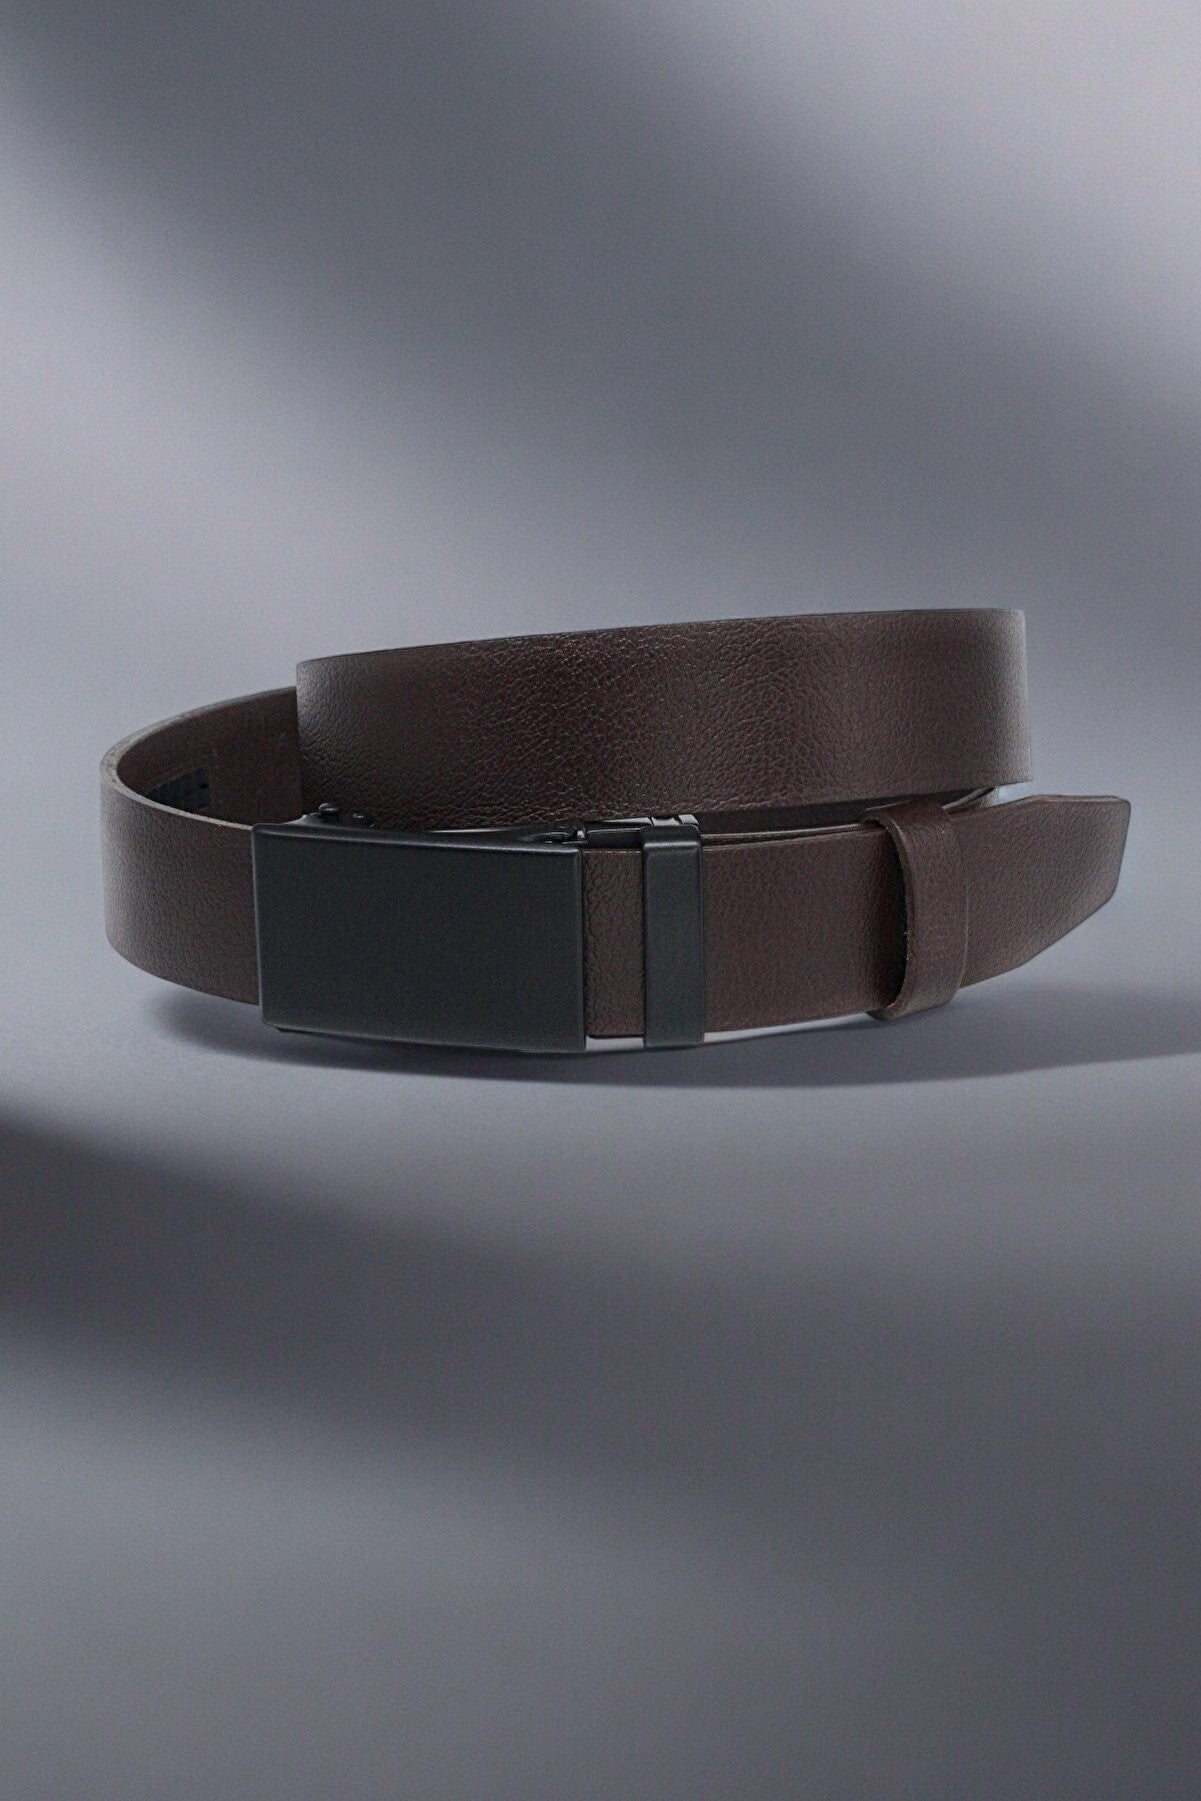 Handmade Leather Belt with Different Color Options  99percenthandmade   